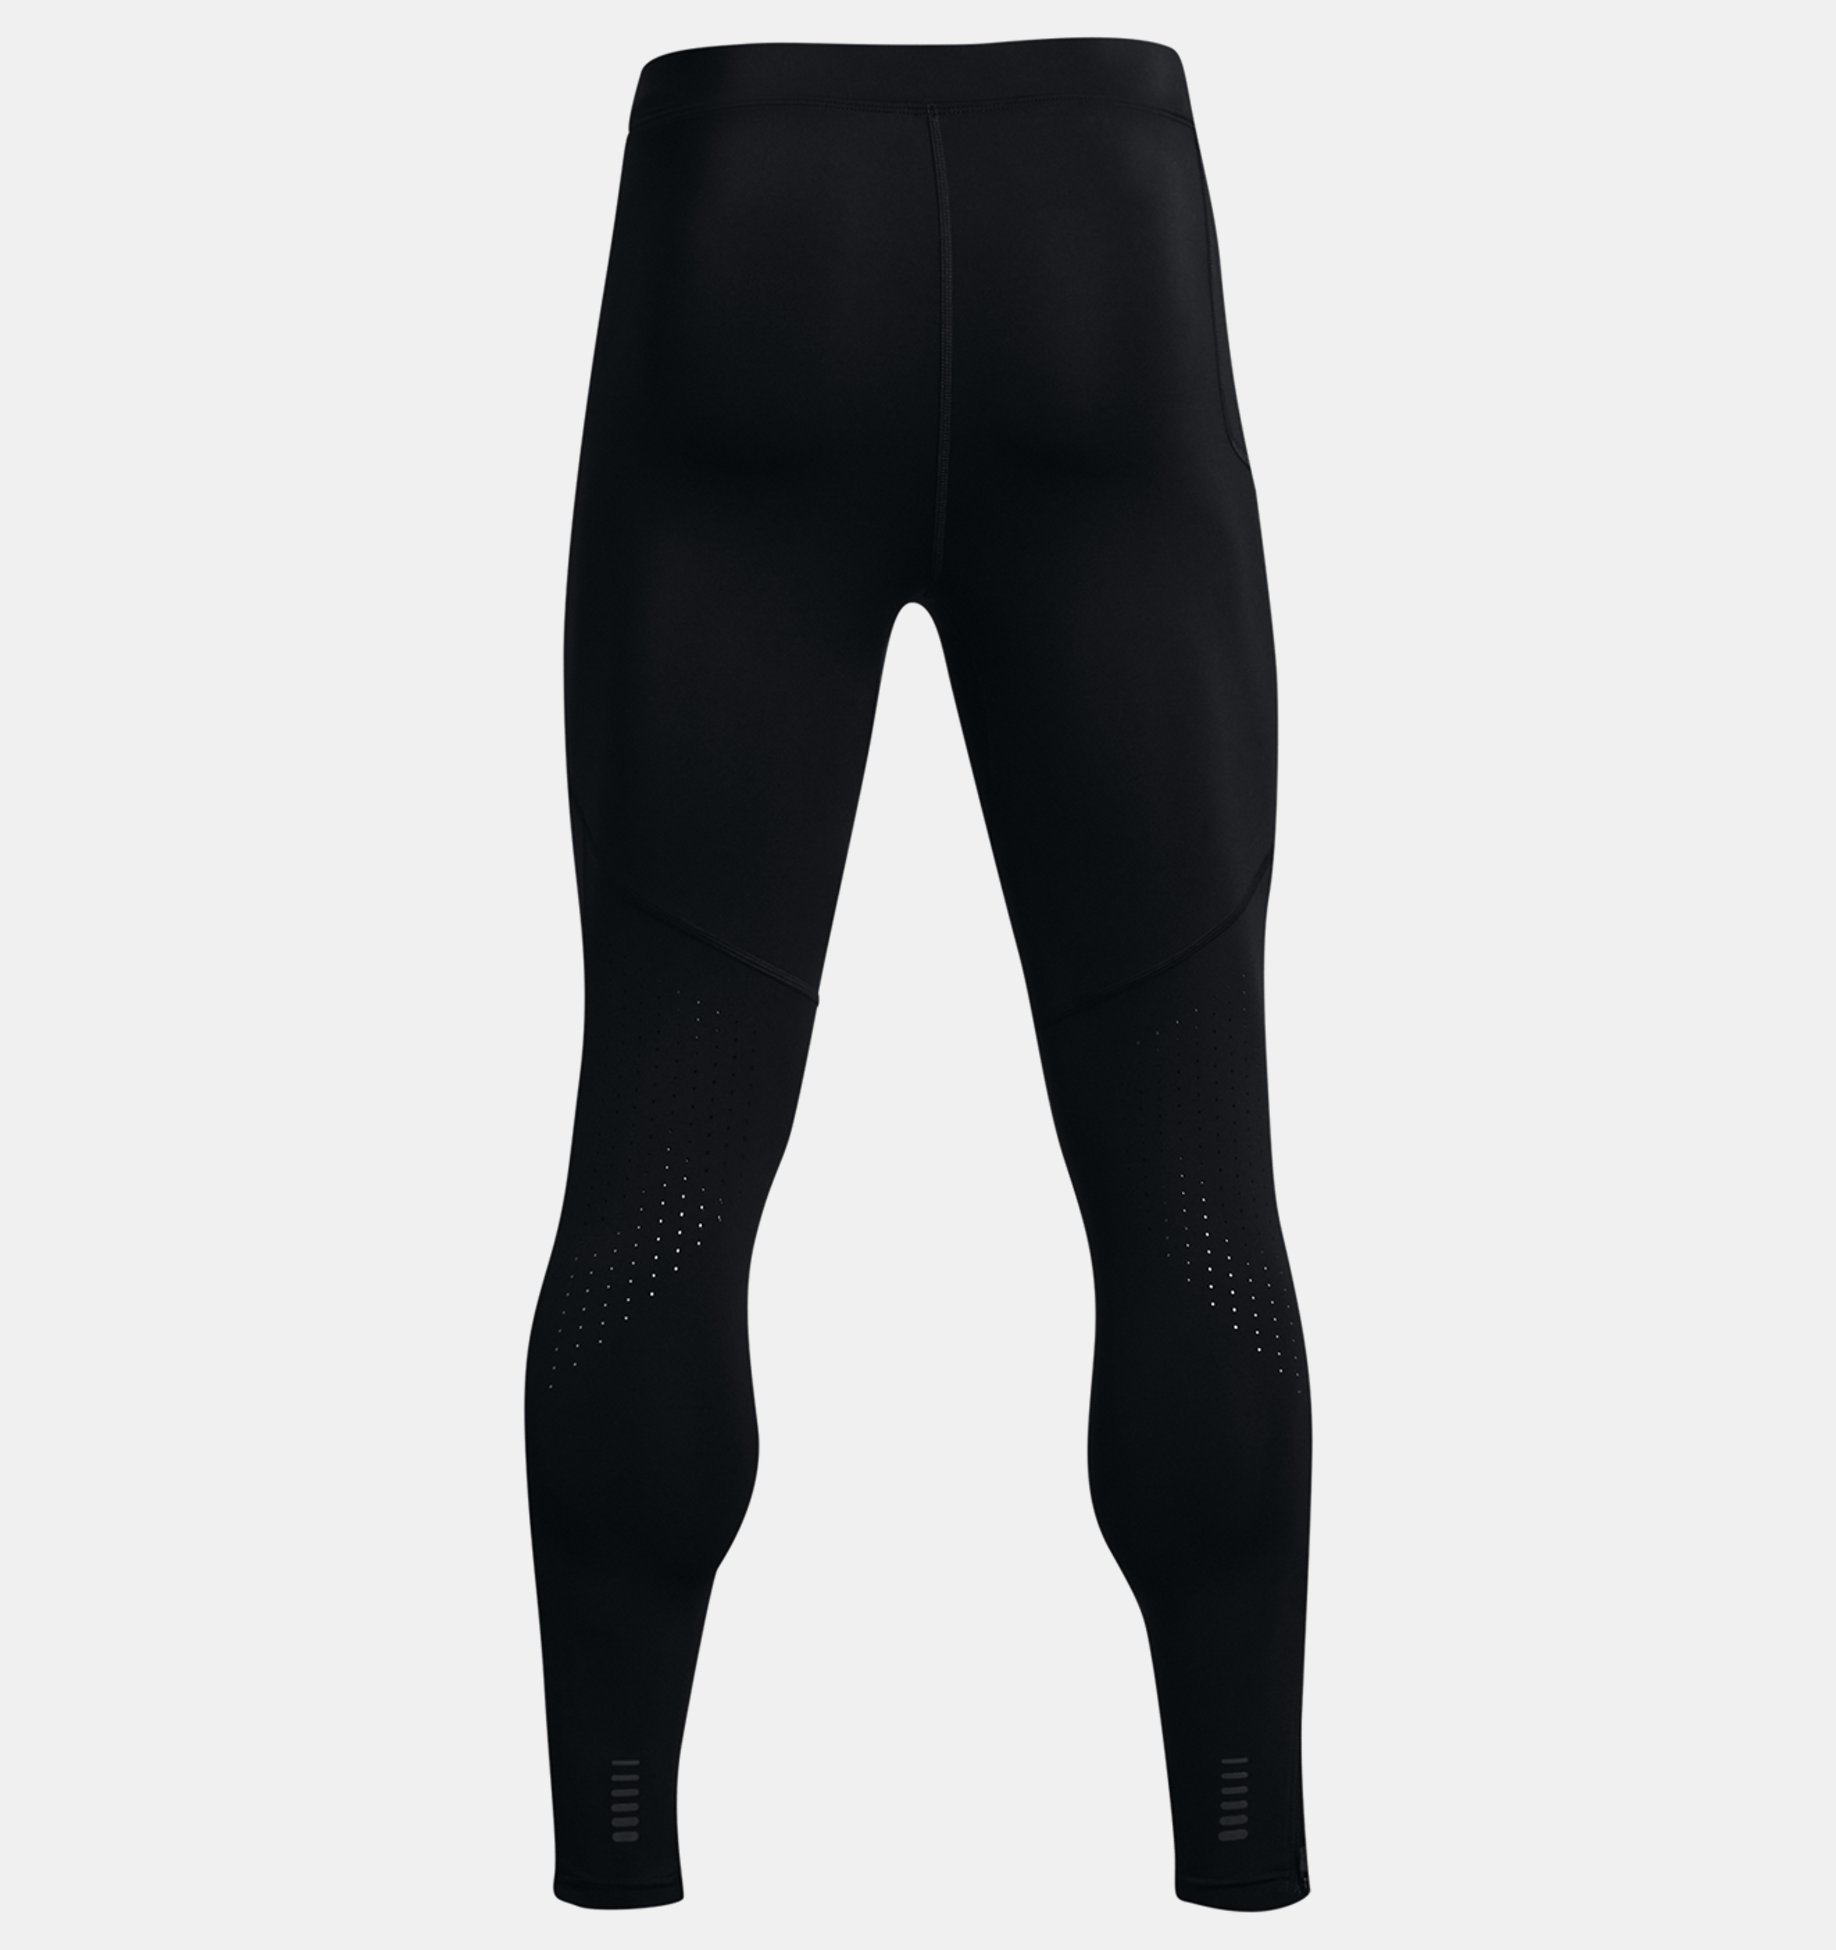 Men's UA Fly Fast 3.0 Tights